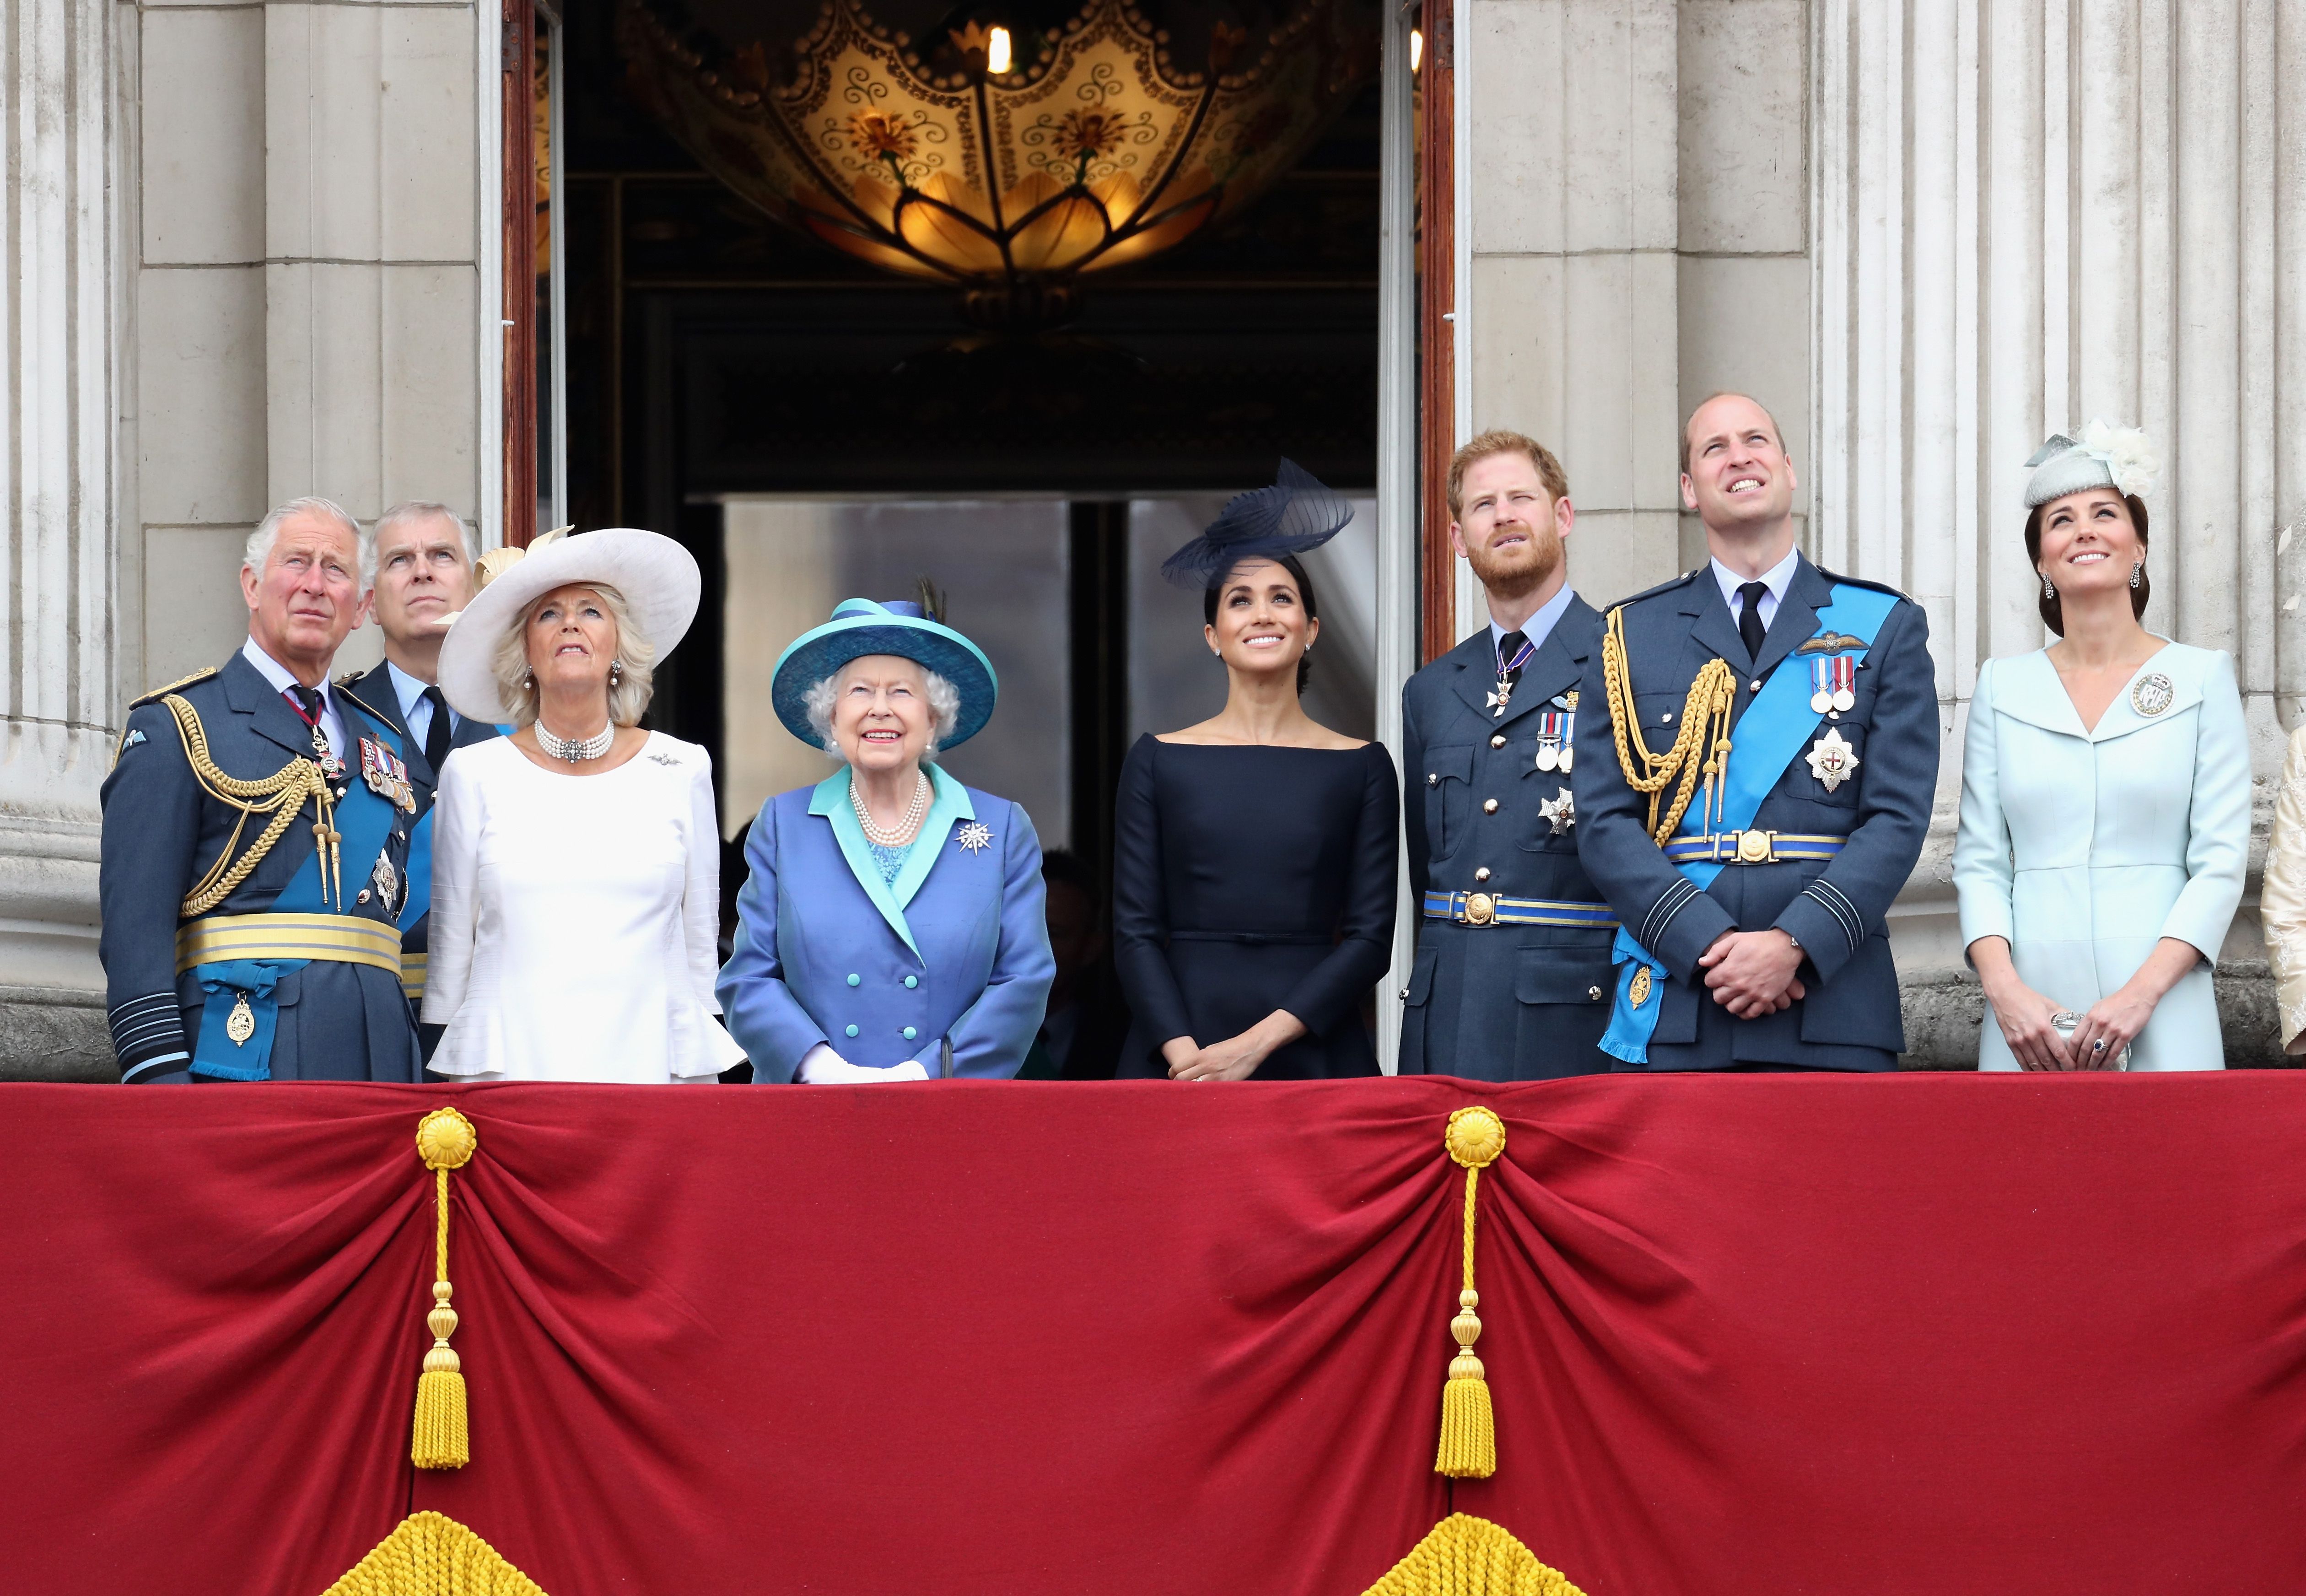 Queen Elizabeth II and other senior members of the royal family watched the RAF flypast on the balcony of Buckingham Palace on July 10, 2018 | Photo: Getty Images